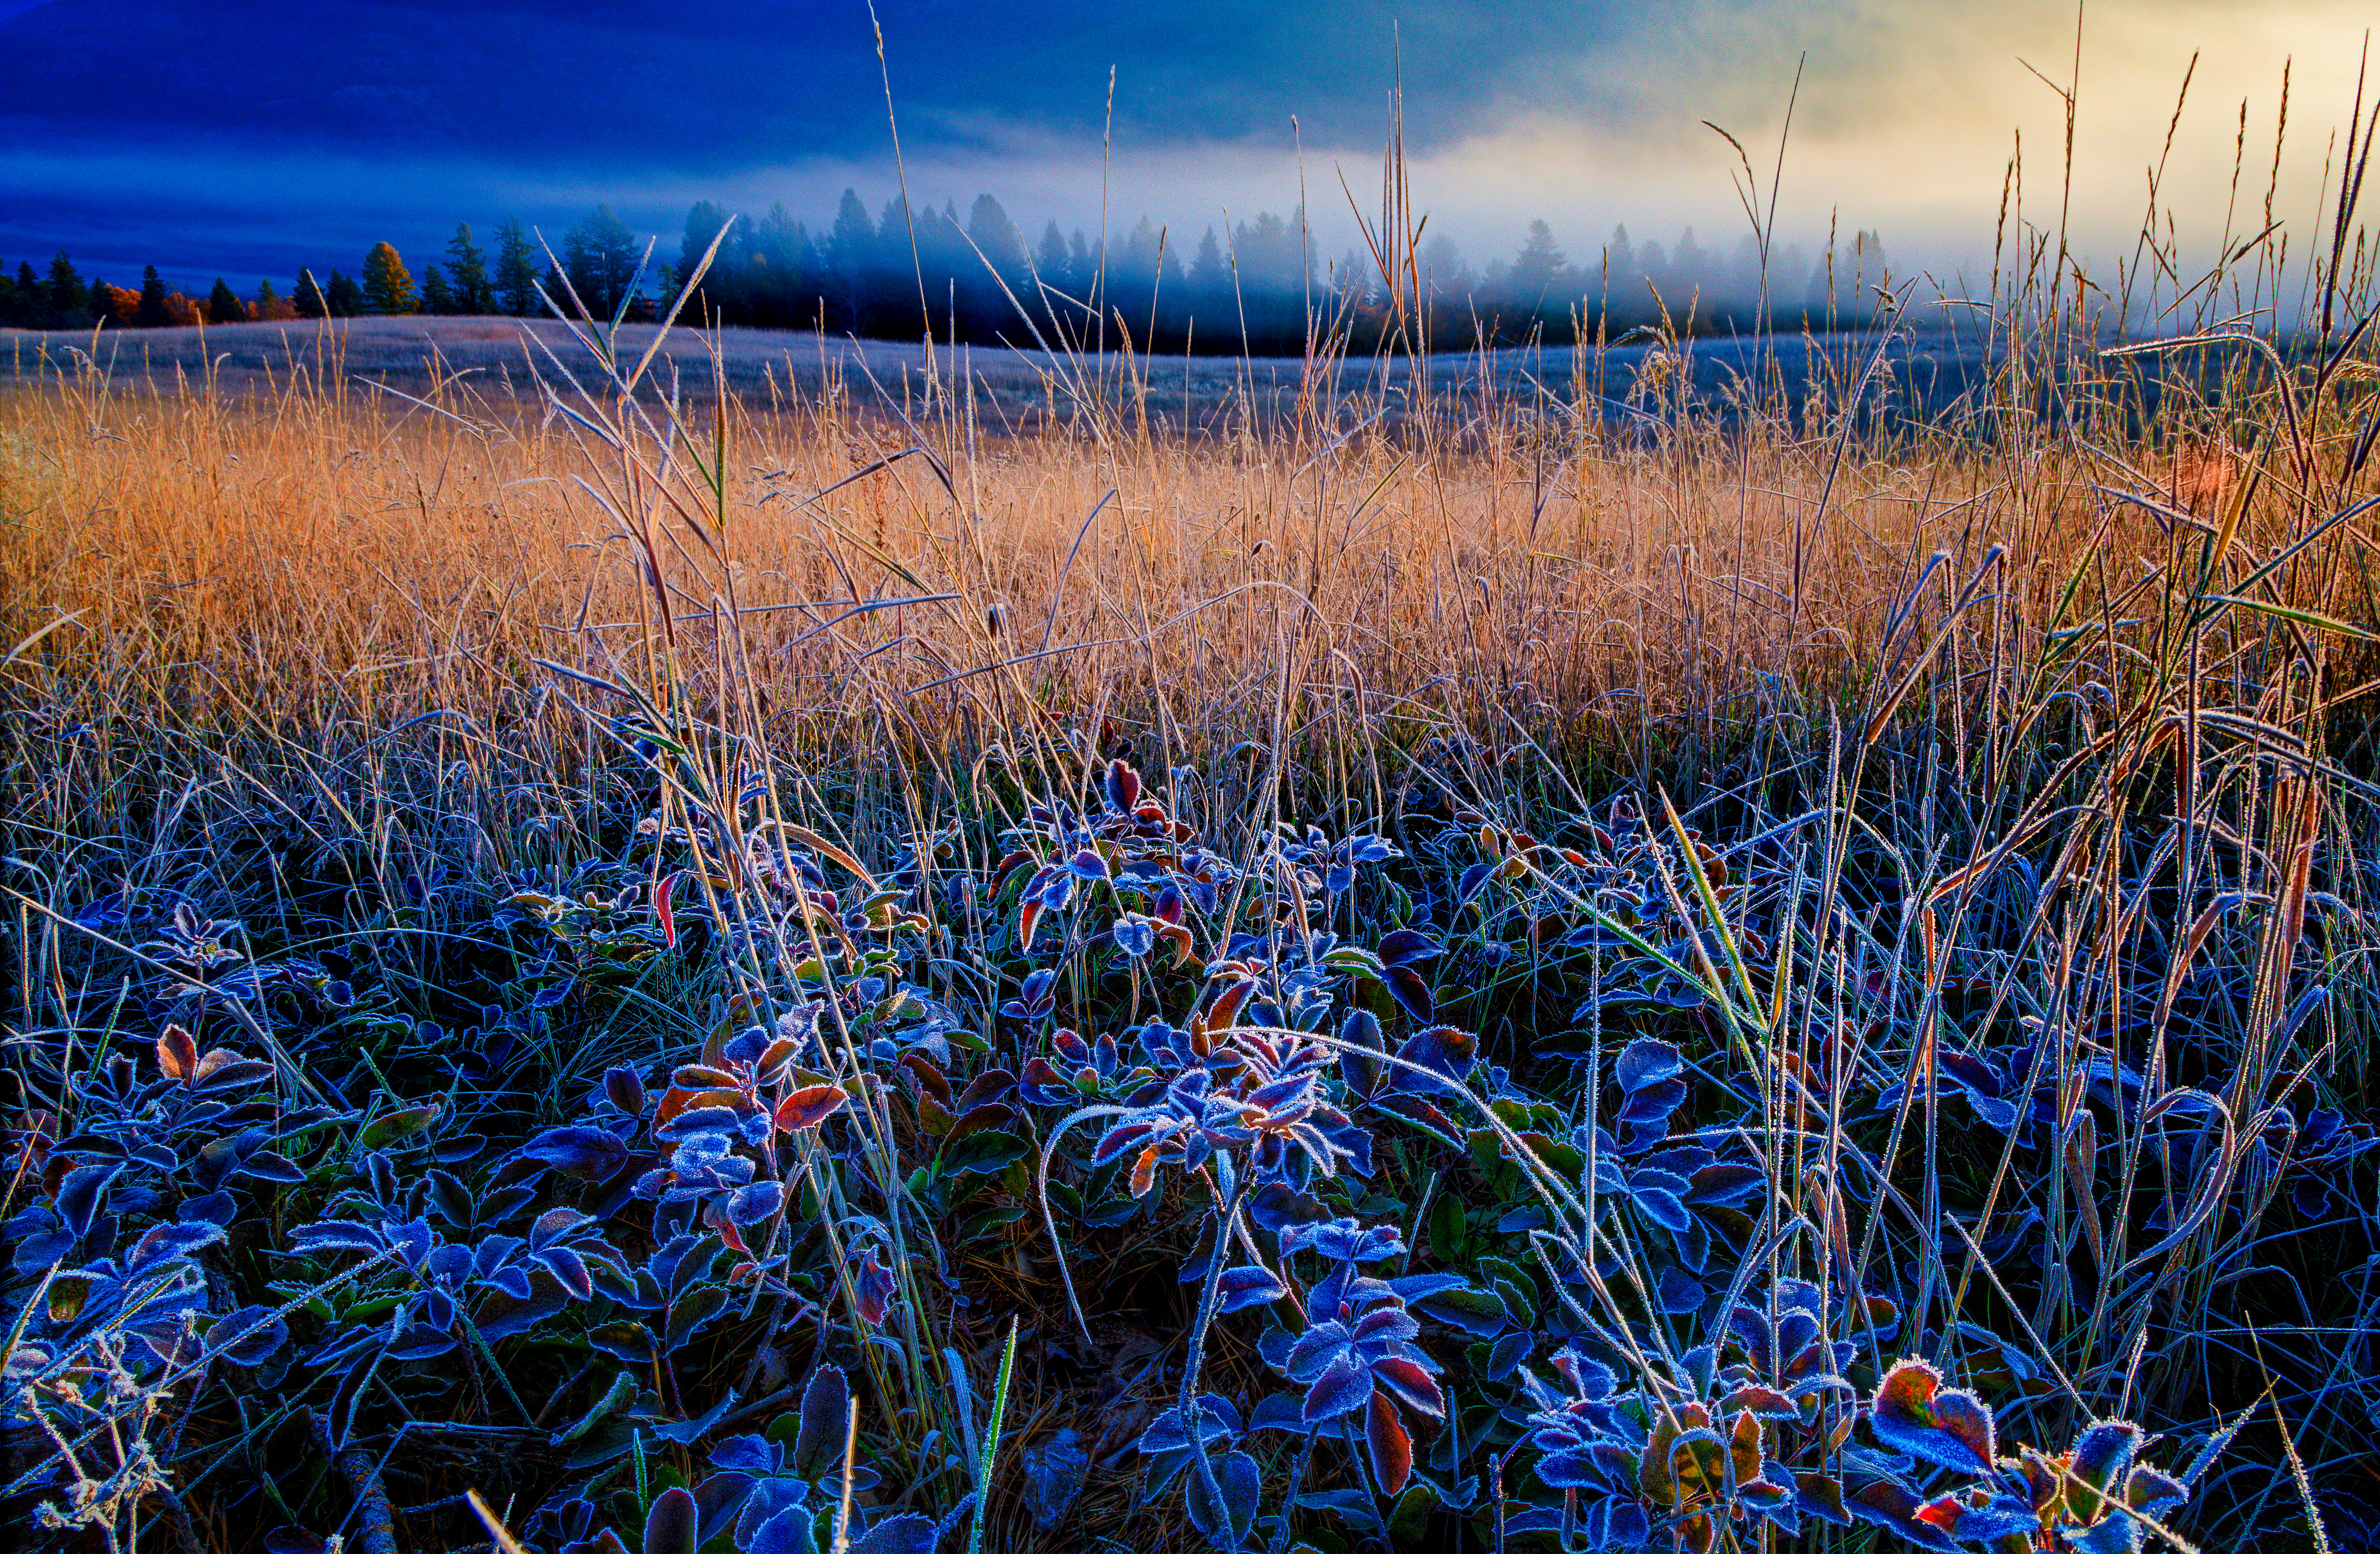 Autumn sunrise and frost in the Flathead valley, Montana